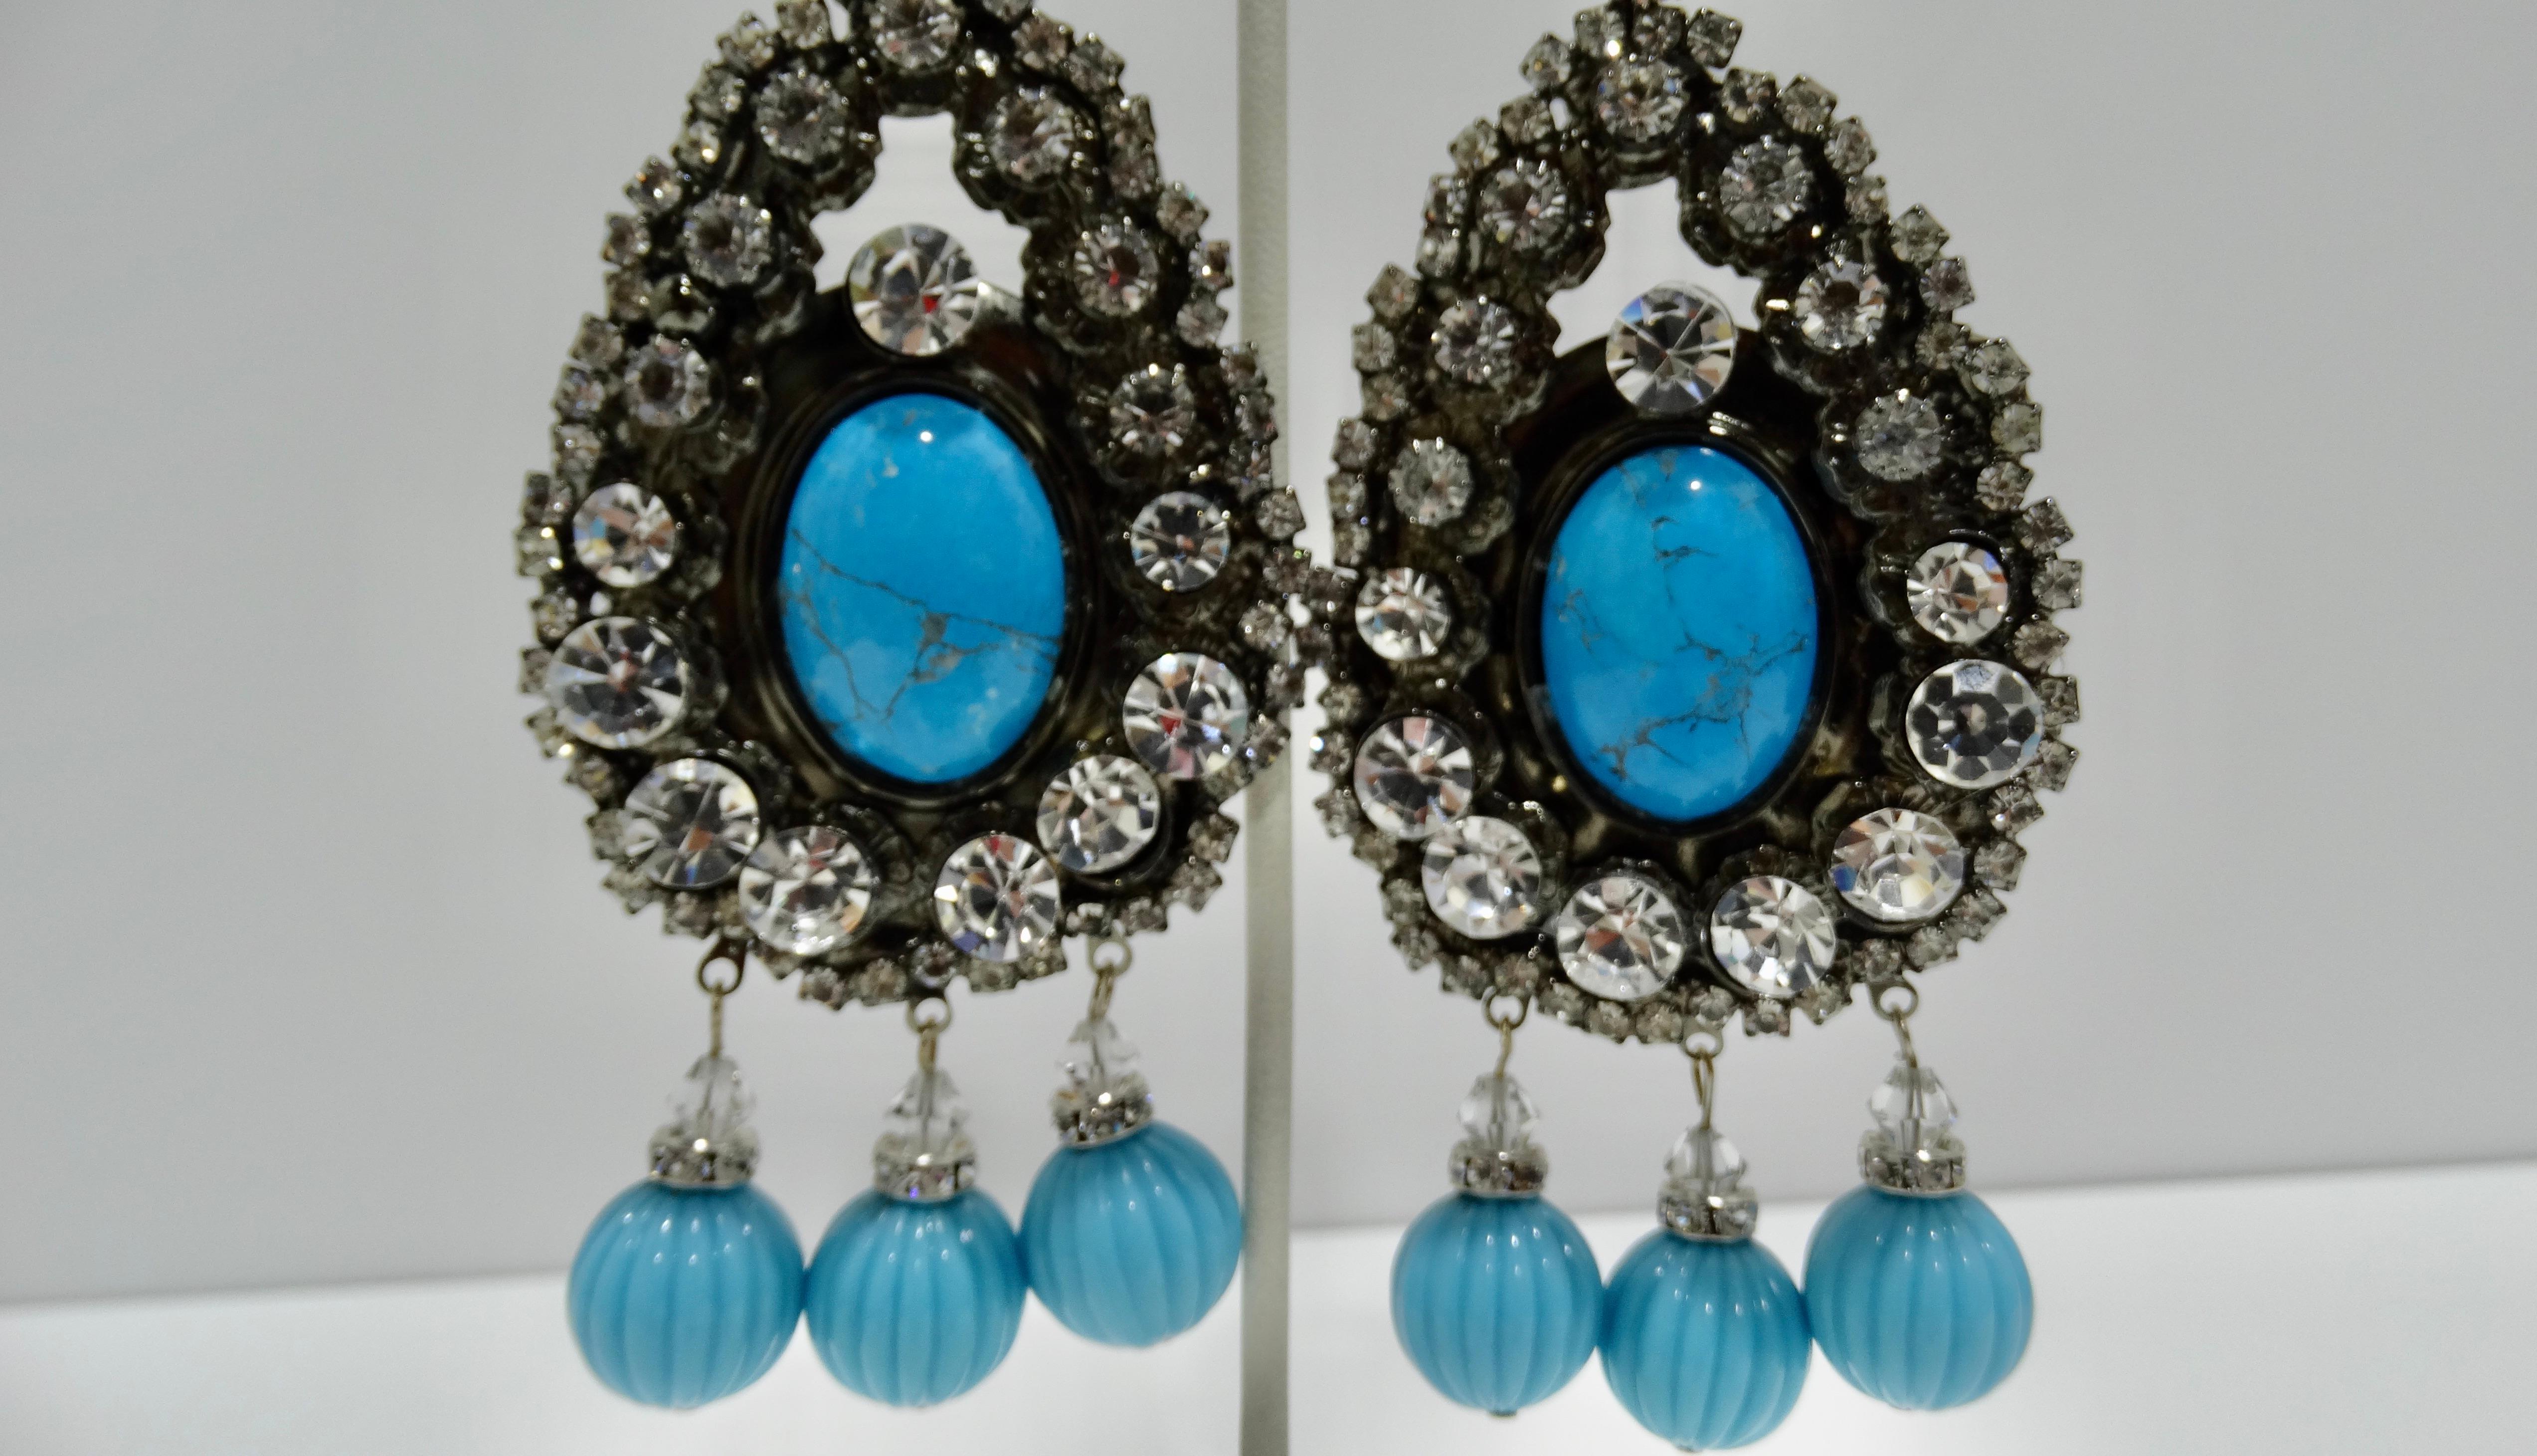 These huge Lawrence VRBA earrings are a rare find. Look no further for a one-of-a-kind statement earring to wear to your next event. Dozens of clear crystals surround a large turquoise stone and drop details add a sense of elegance. Don't blend in